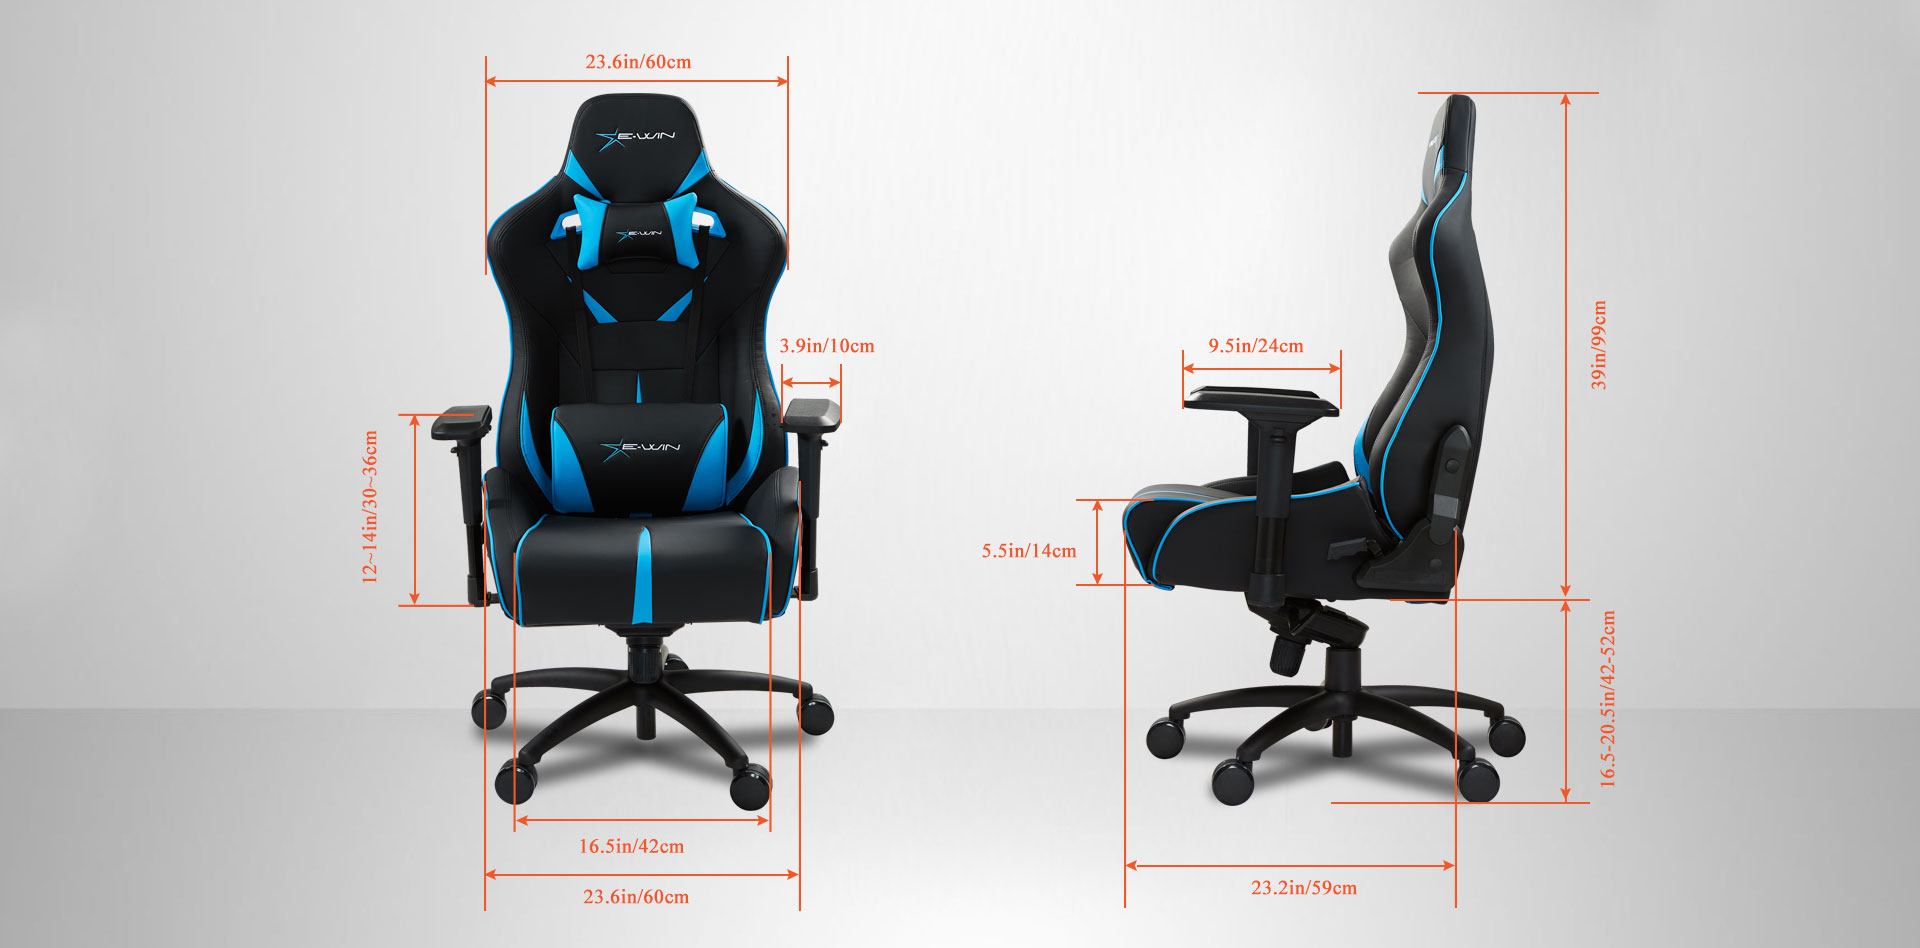 EwinRacing Champion Gaming Chairs Dimensions